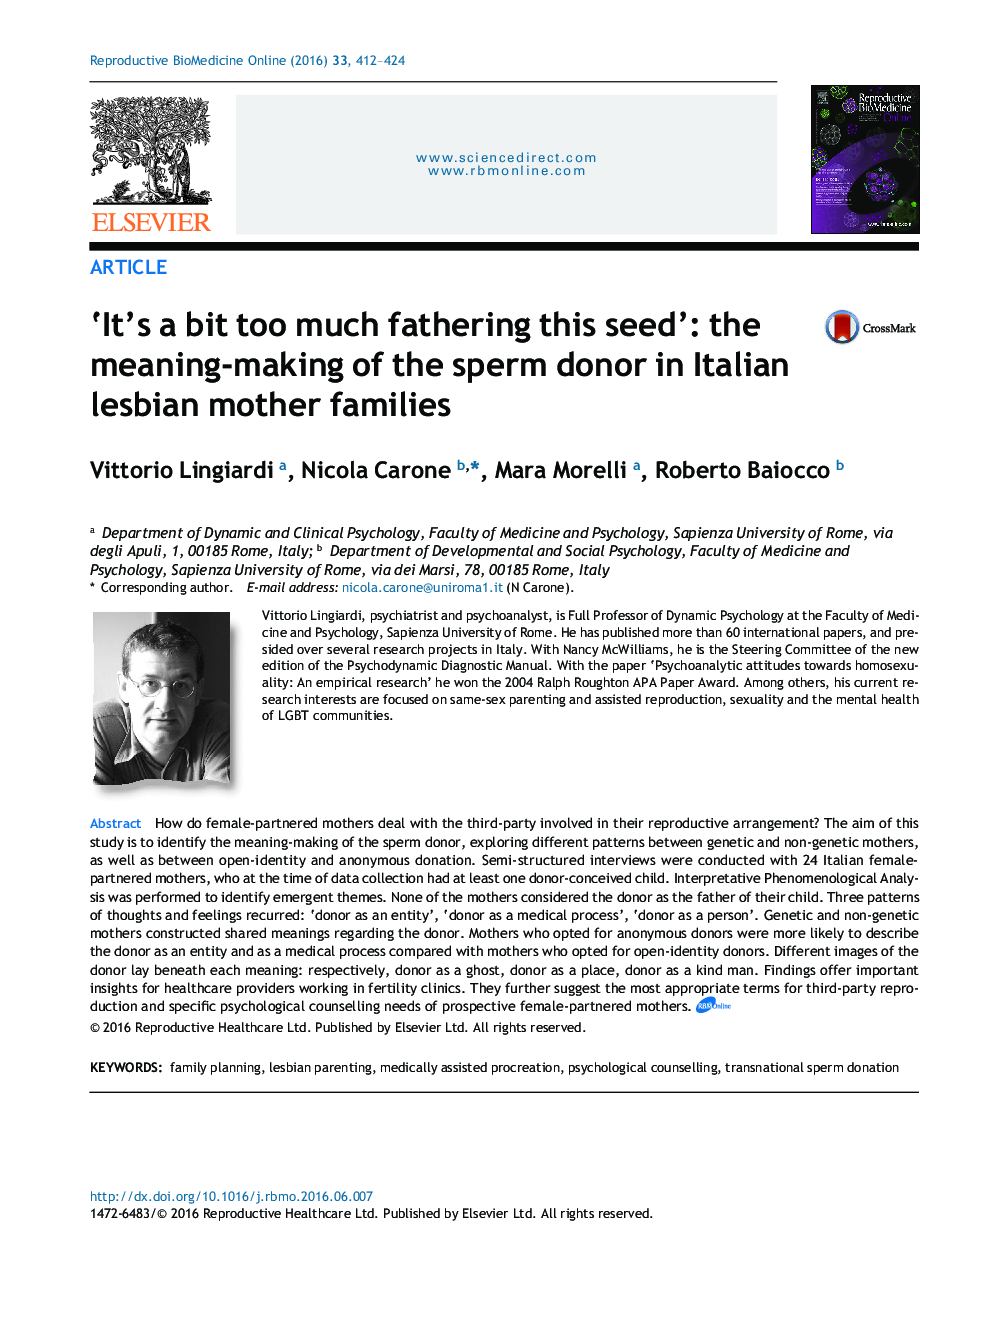 ‘It's a bit too much fathering this seed’: the meaning-making of the sperm donor in Italian lesbian mother families